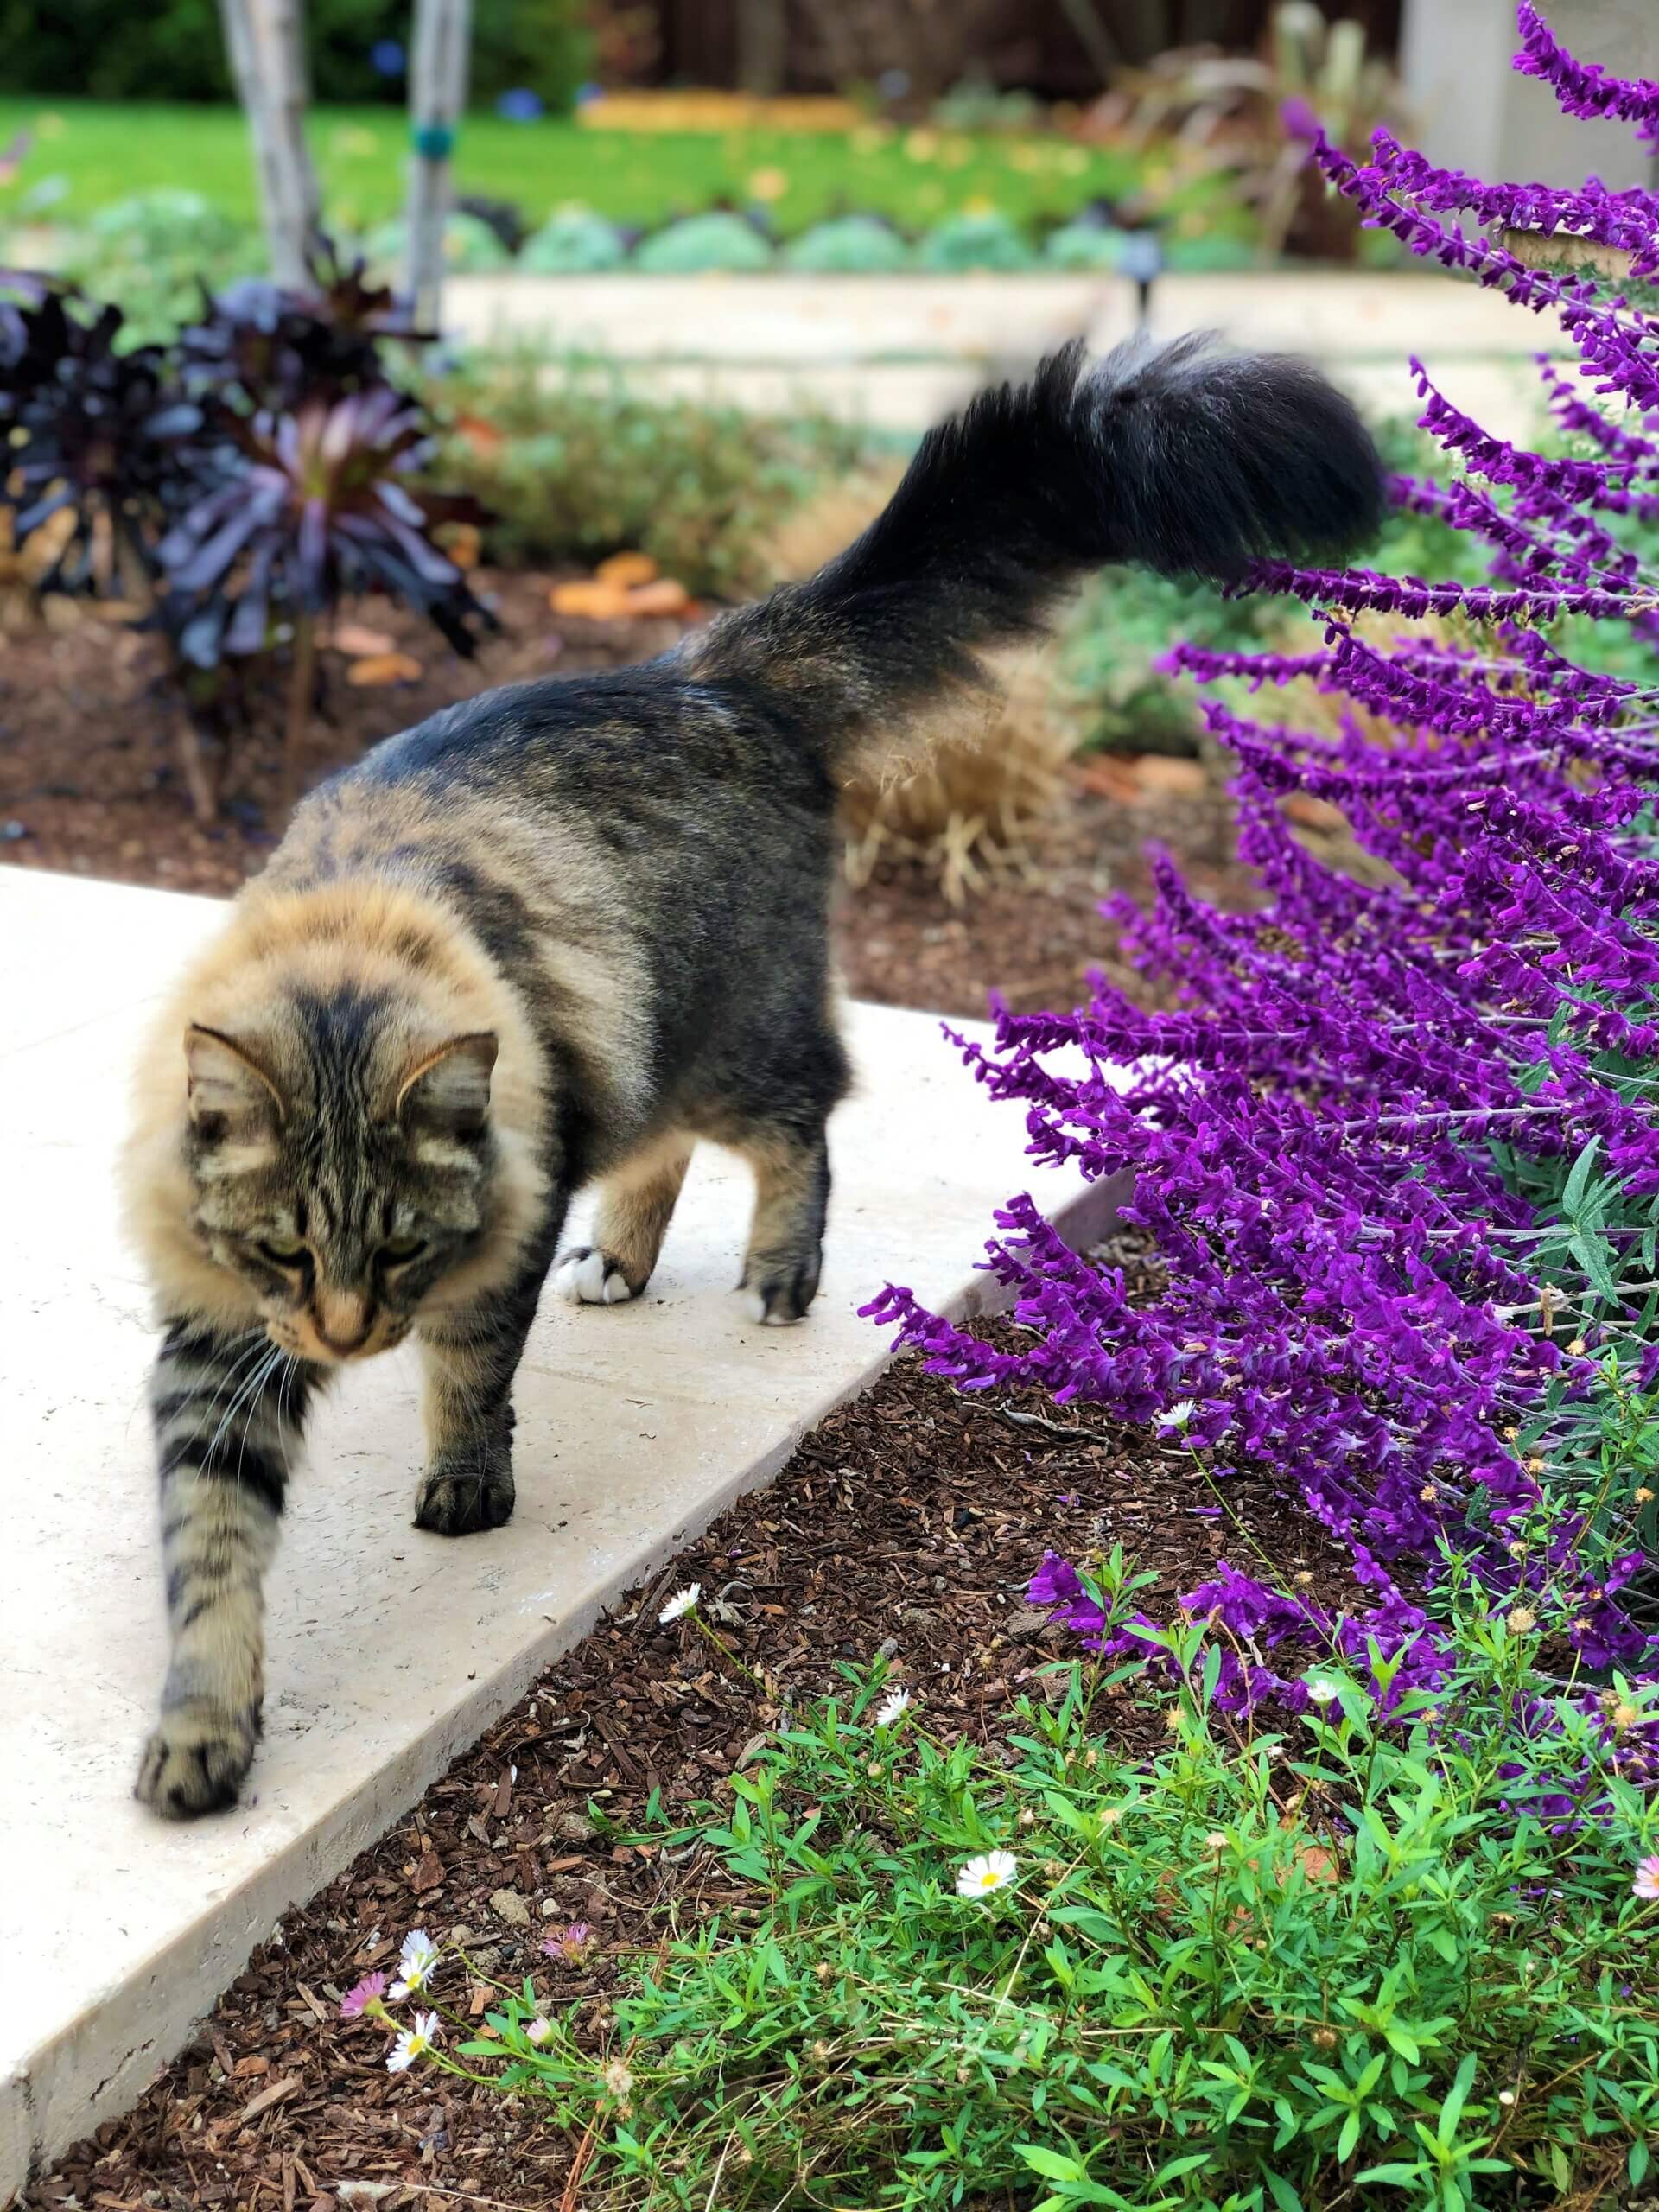 Cat strolling on stone patio next to purple flowers and foliage